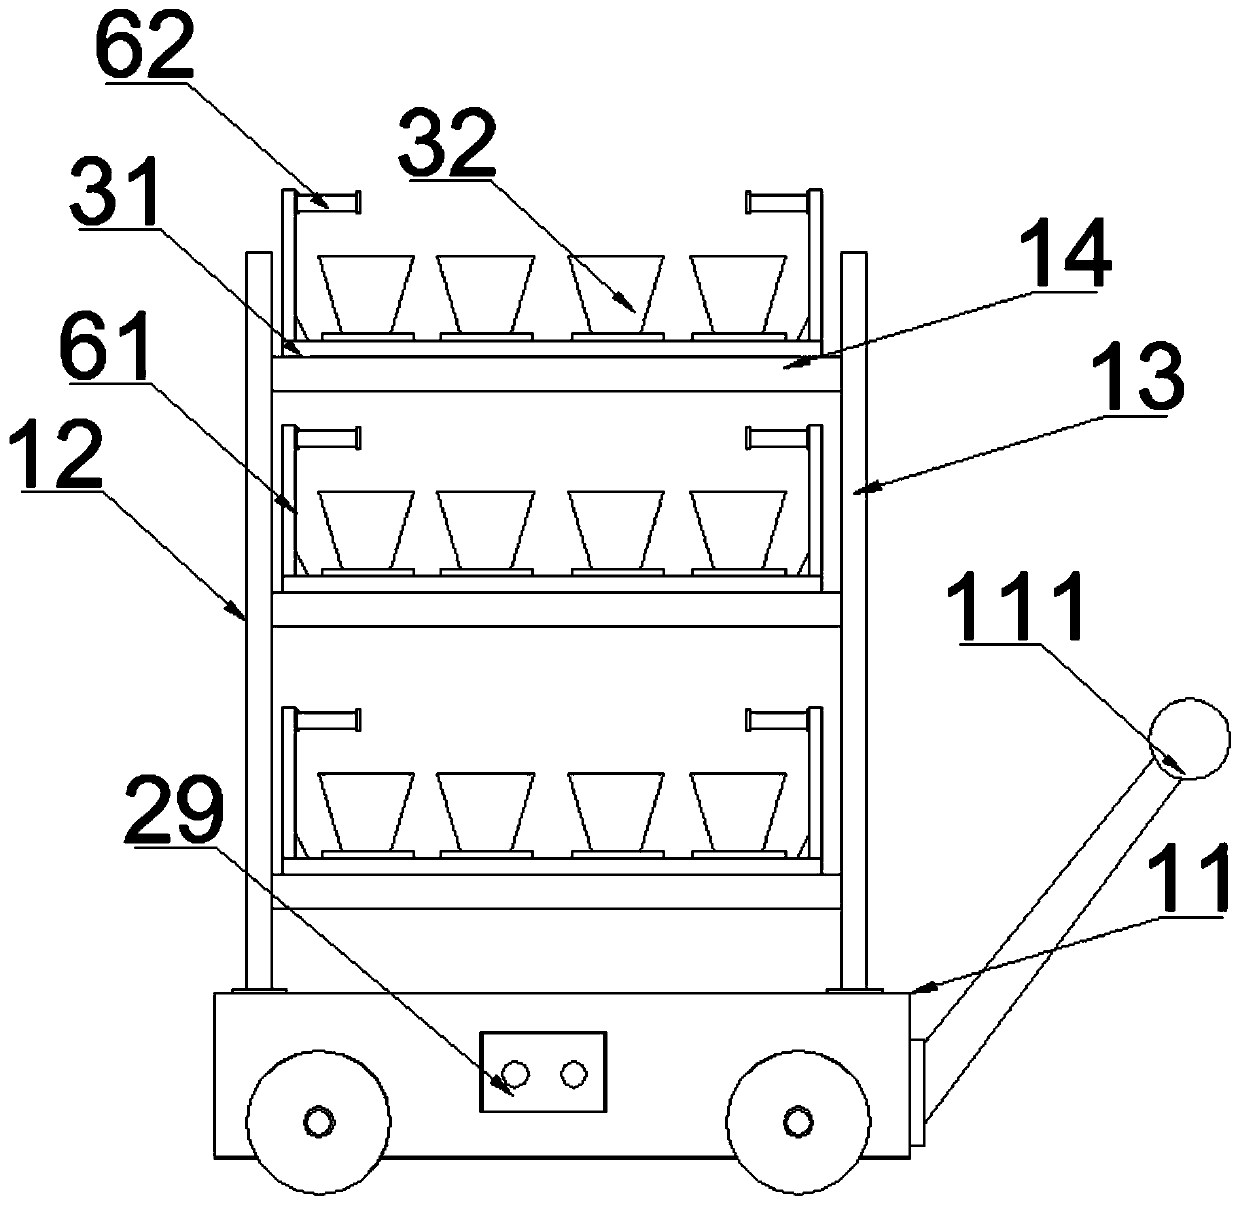 Multi-layer plant loading and unloading truck